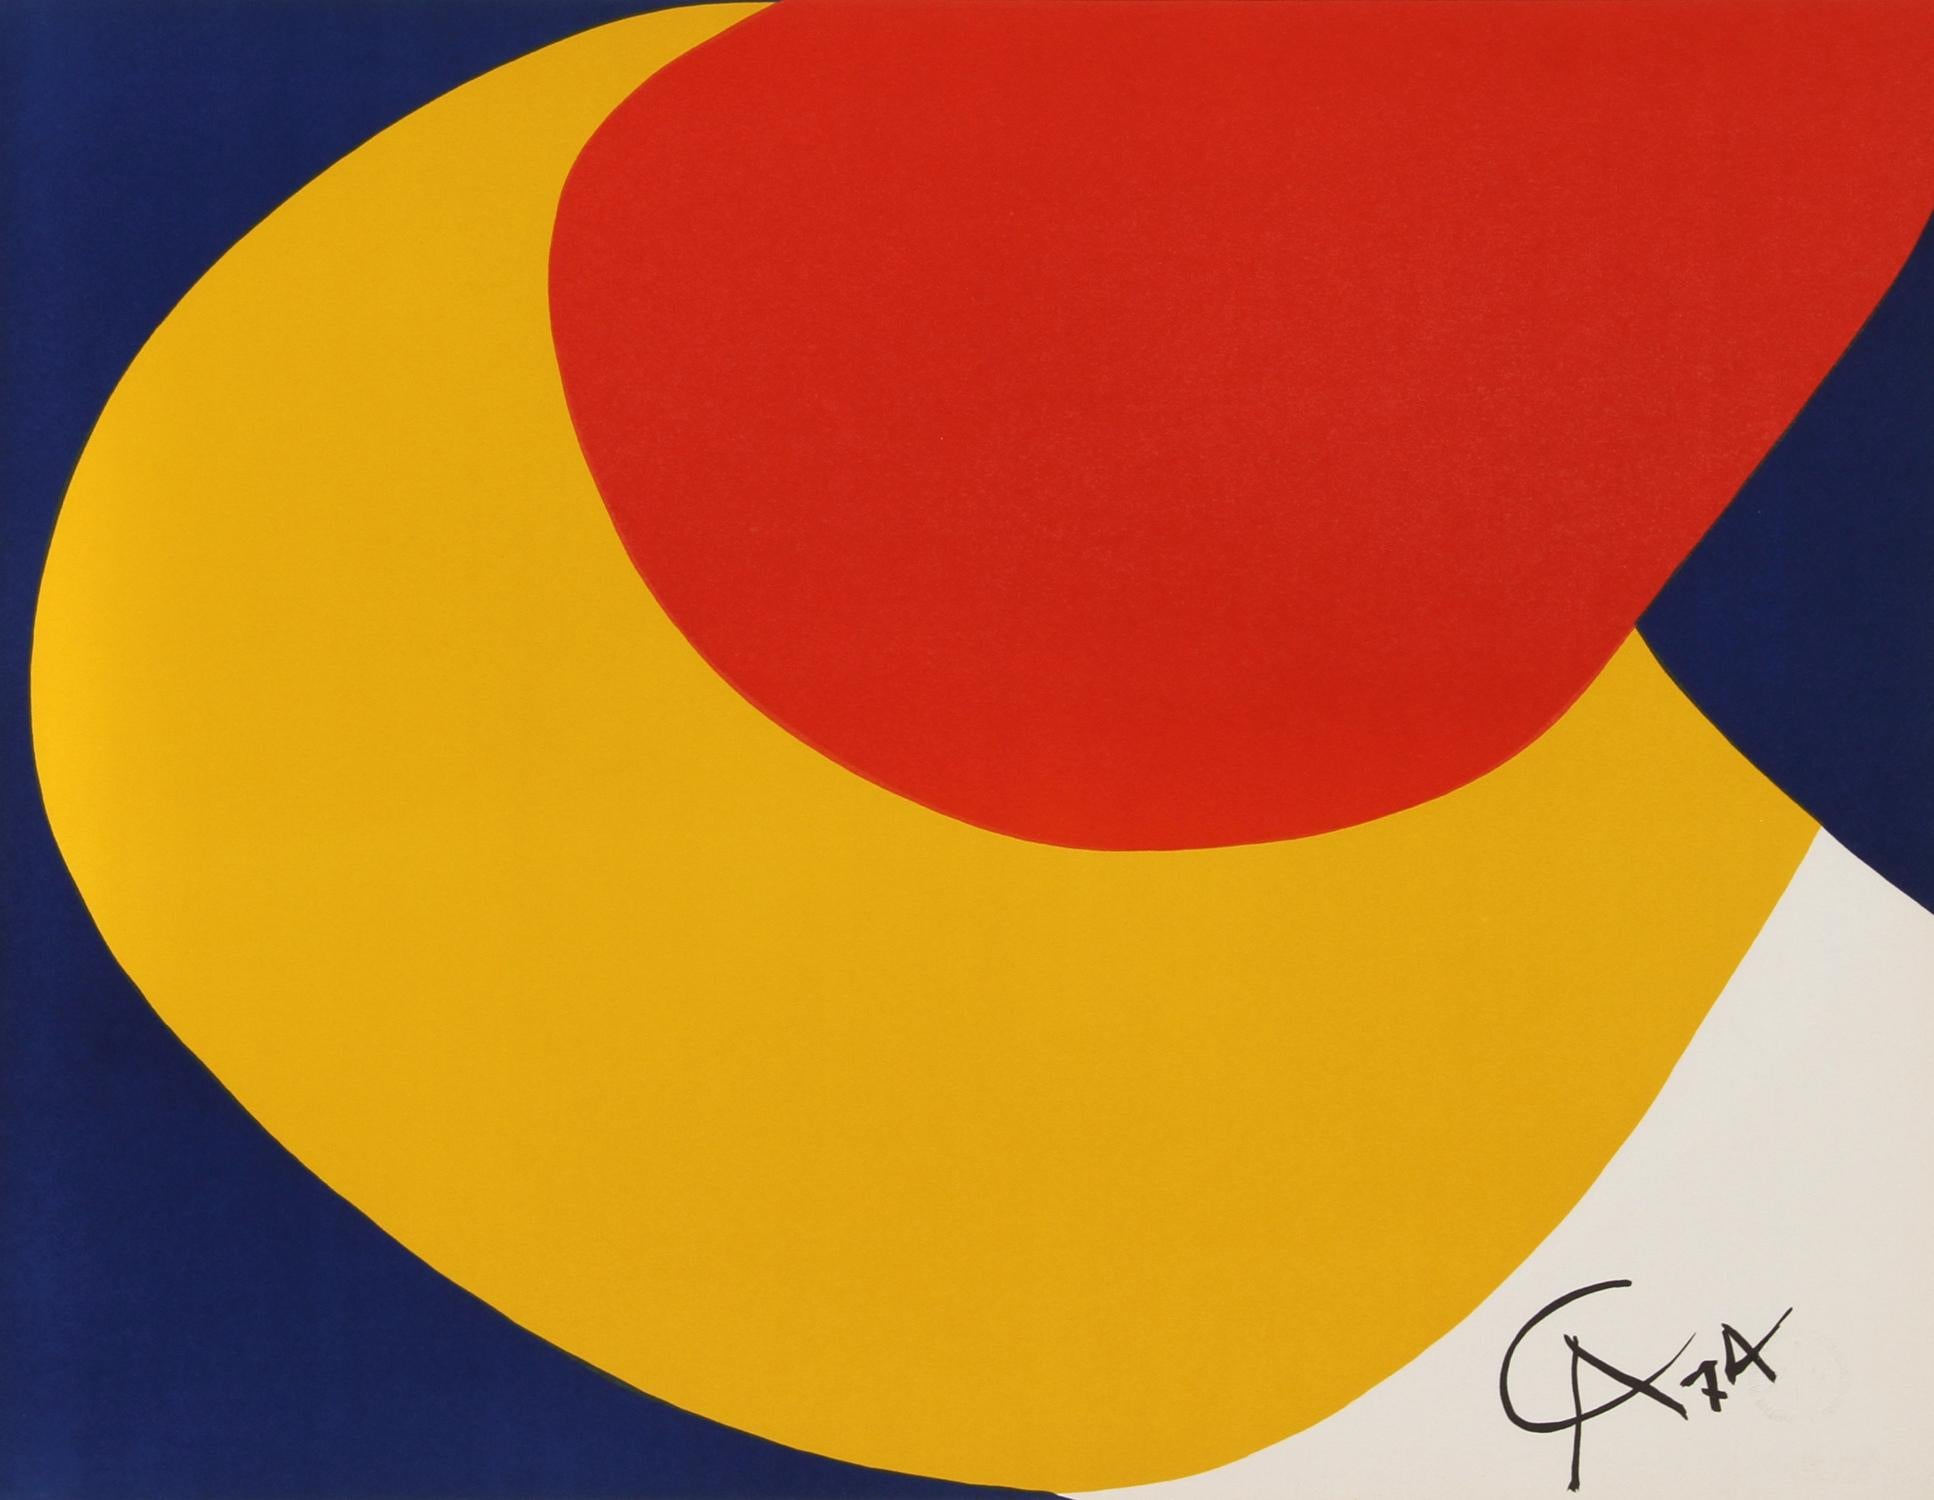 Artist: Alexander Calder (after) (American, 1898-1976)
Title: Flying Colors for Braniff Airlines
Year: 1974
Medium: Lithograph, signed in the plate
Size: 20 in. x 26 in. (50.8 cm x 66.04 cm)